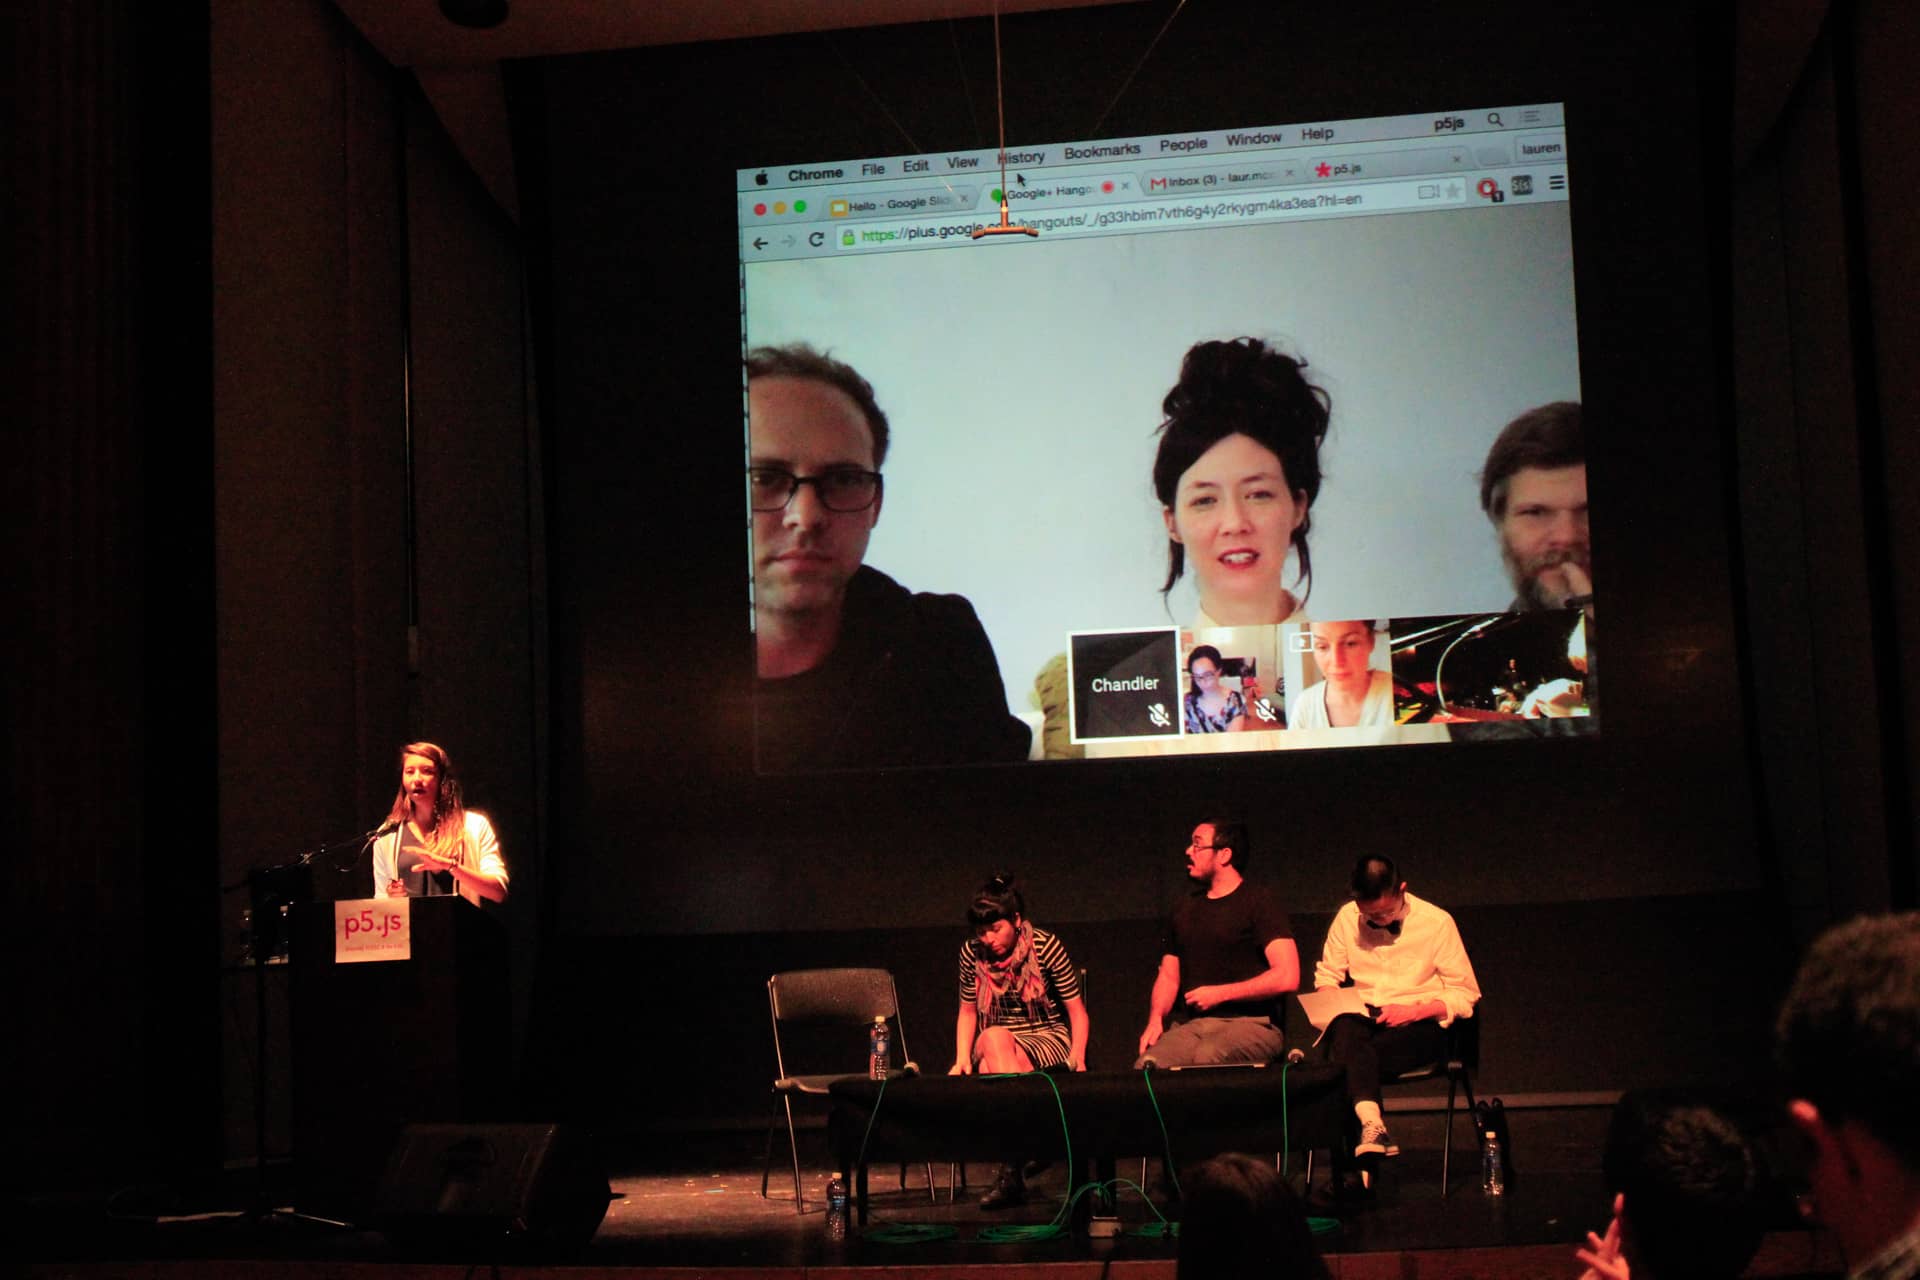 Woman speaks at a podium in an auditorium while three participants sit on the stage and another three are skyping in on the stage screen"